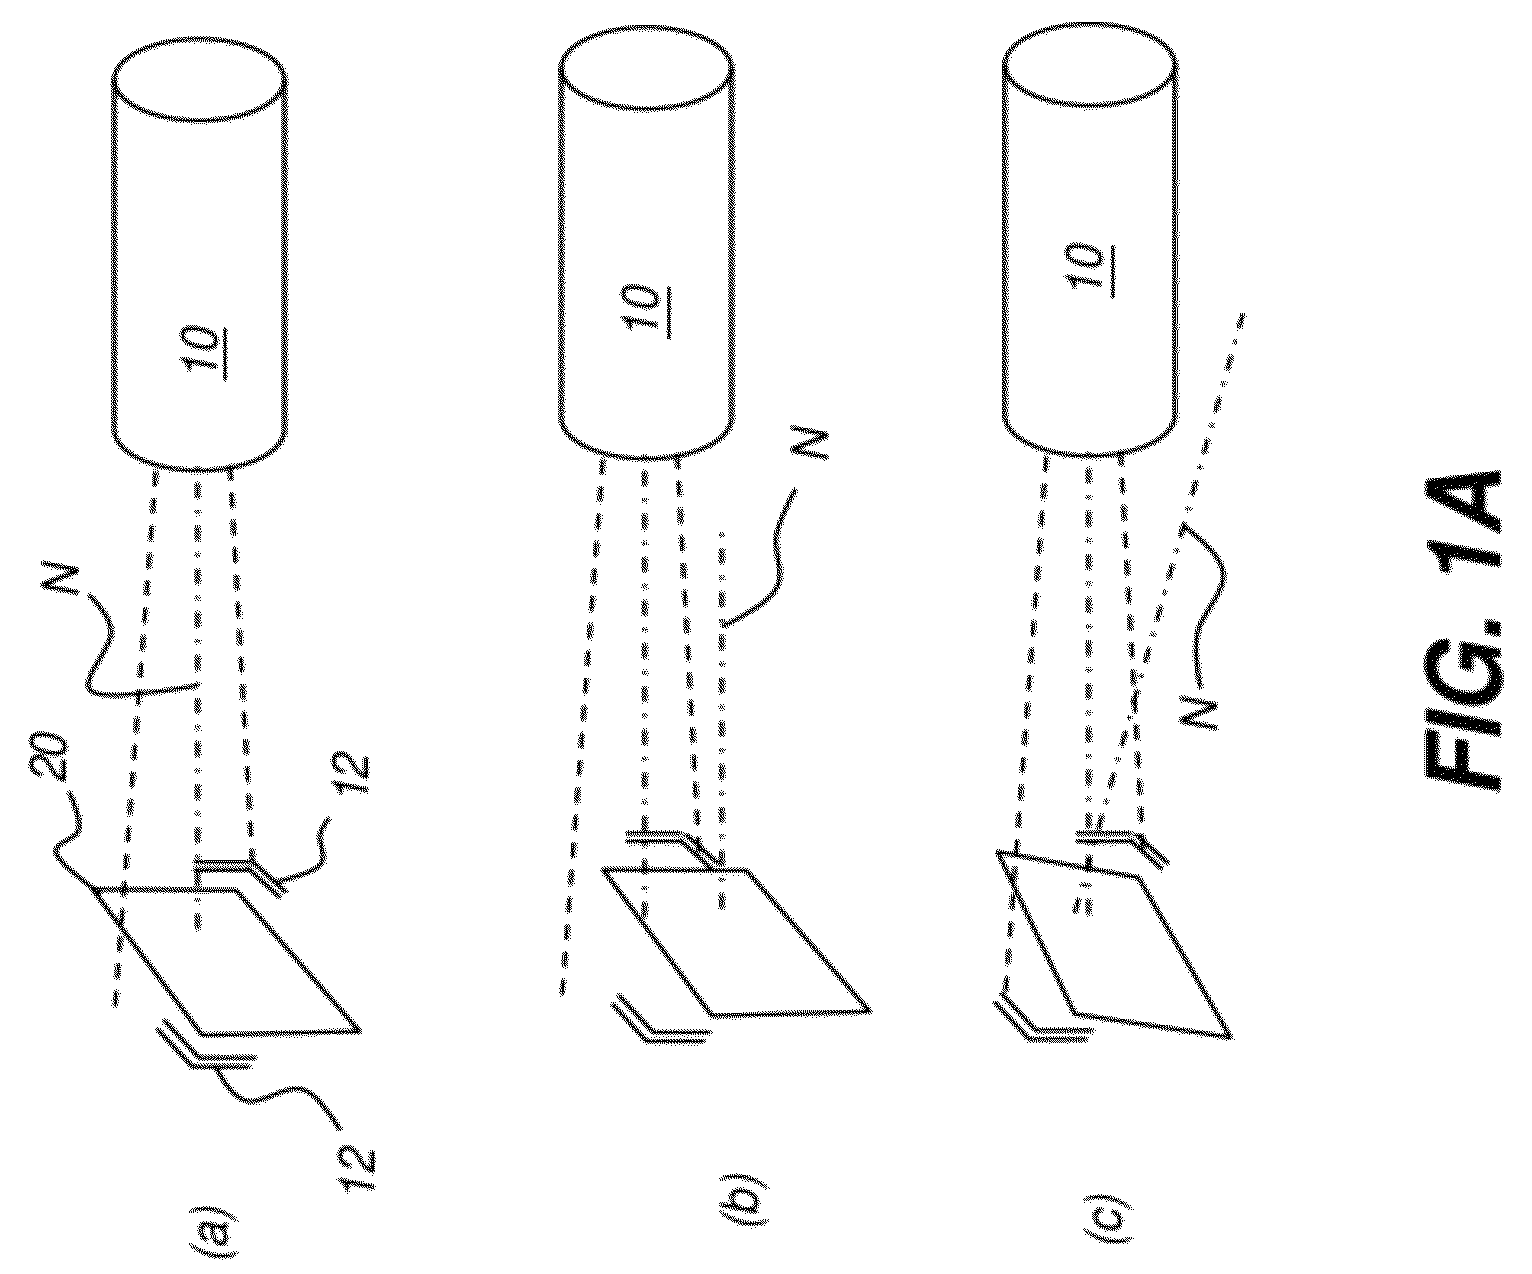 Method for generating an intraoral volume image